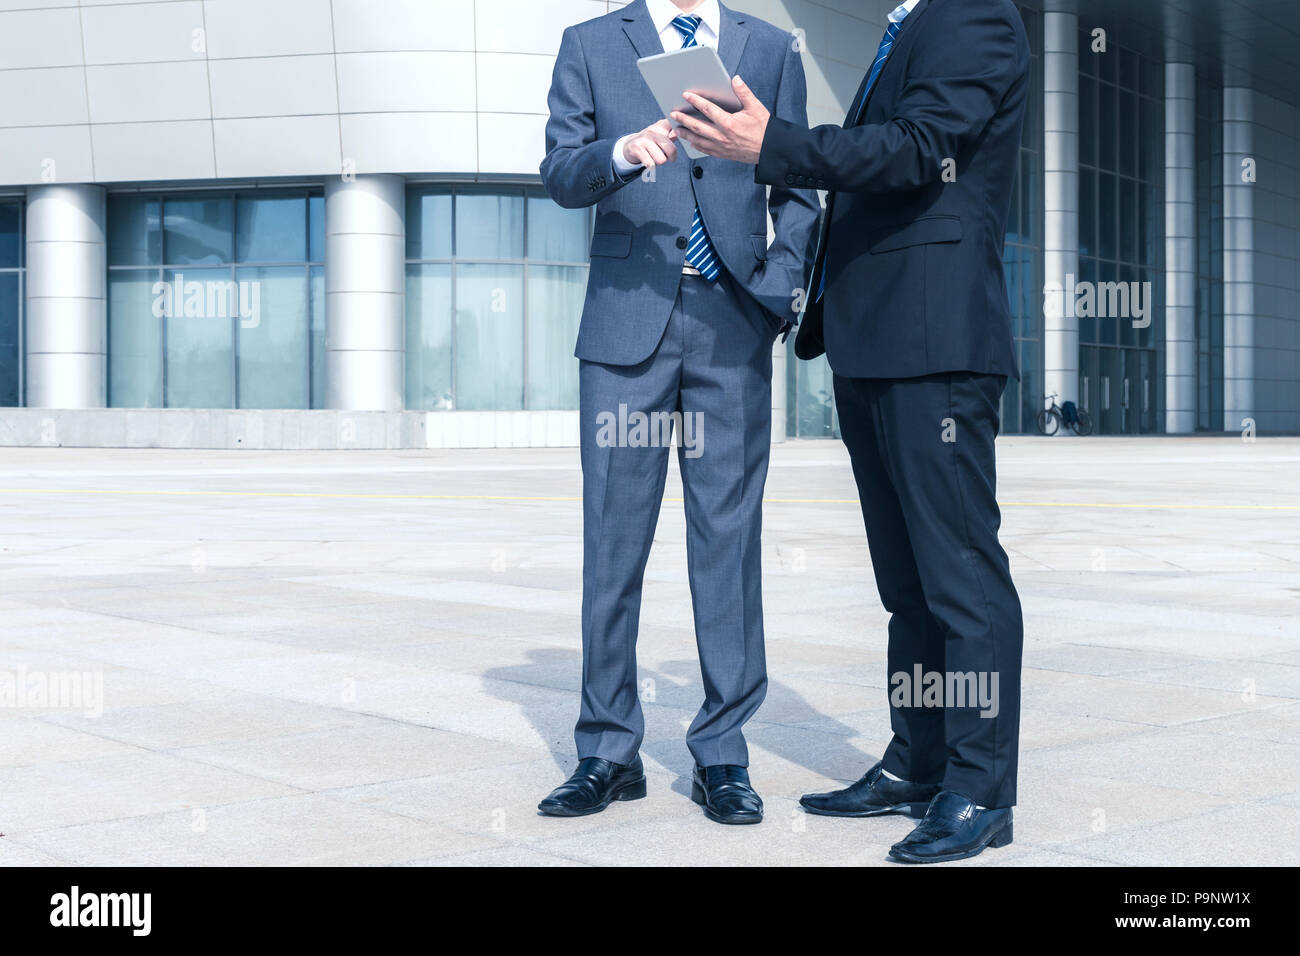 Asian businessman discussing work Stock Photo